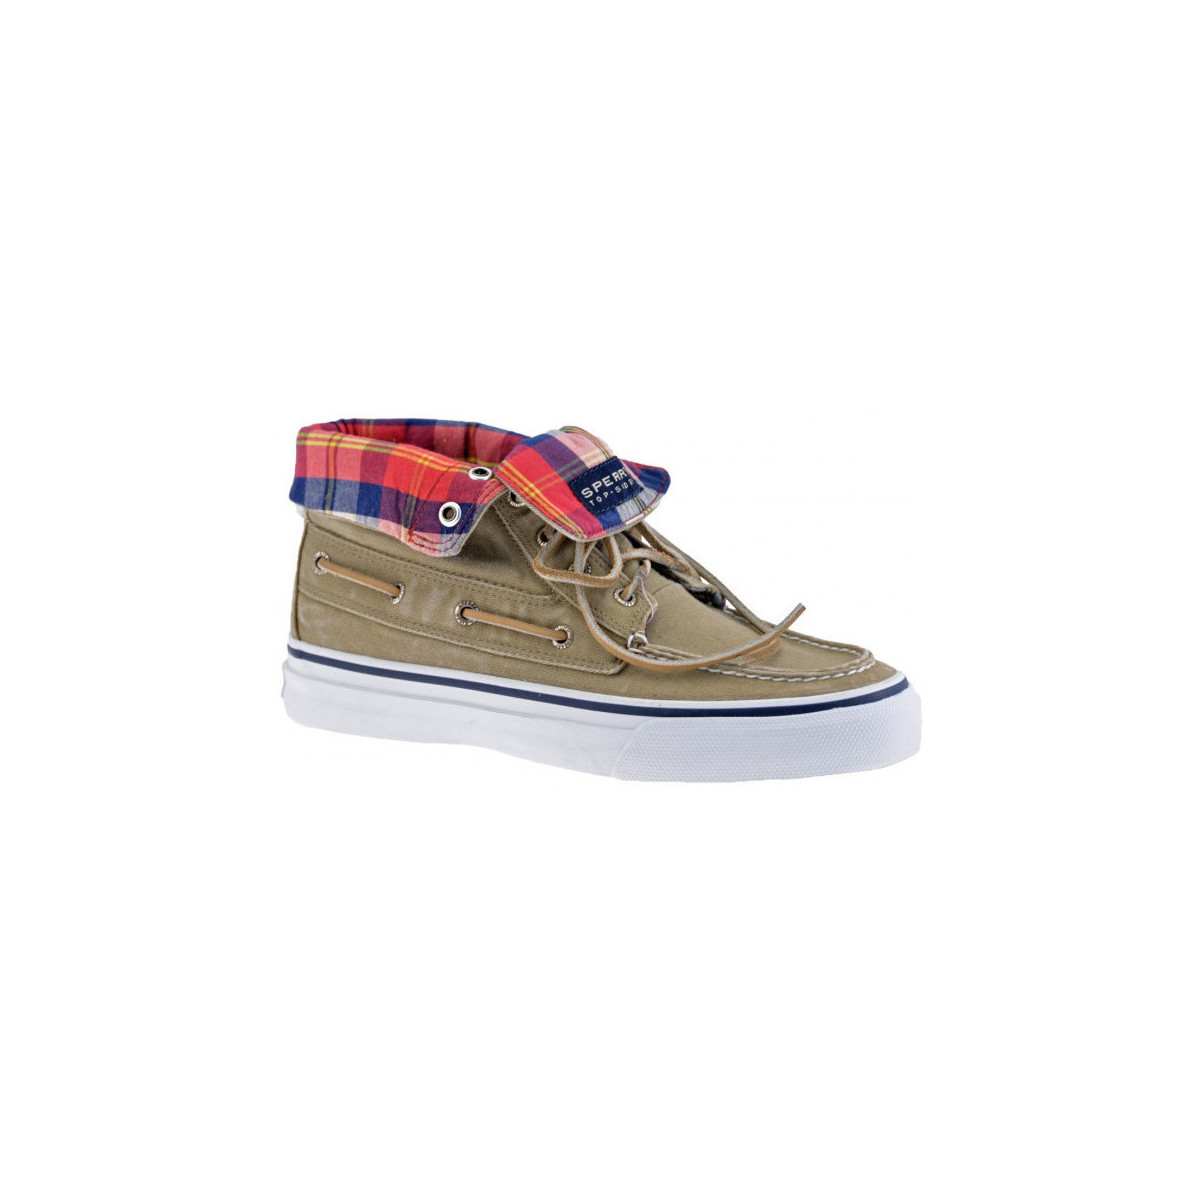 Sneakers Sperry Top-Sider Bahama Boot